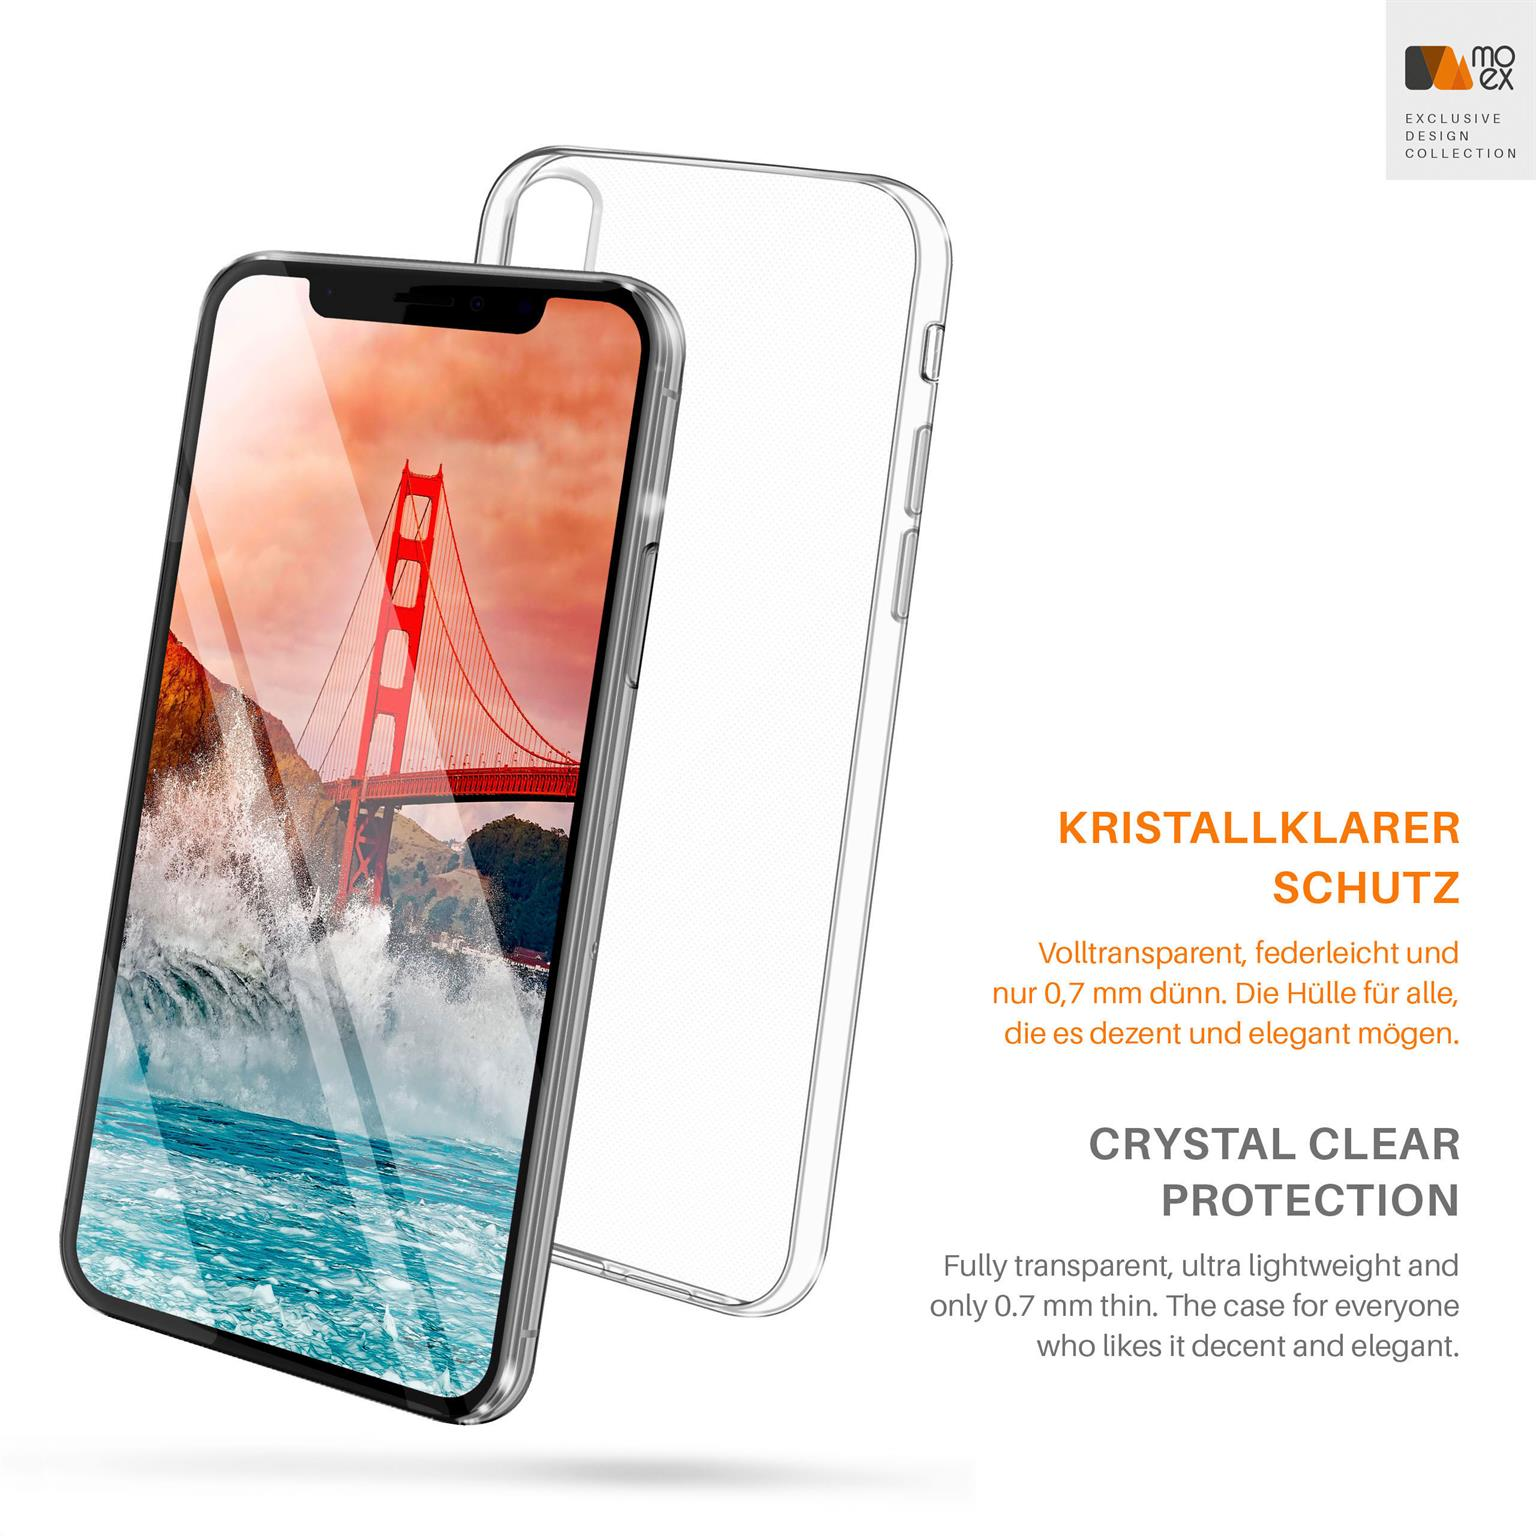 Backcover, iPhone Aero XS Max, MOEX Apple, Case, Crystal-Clear